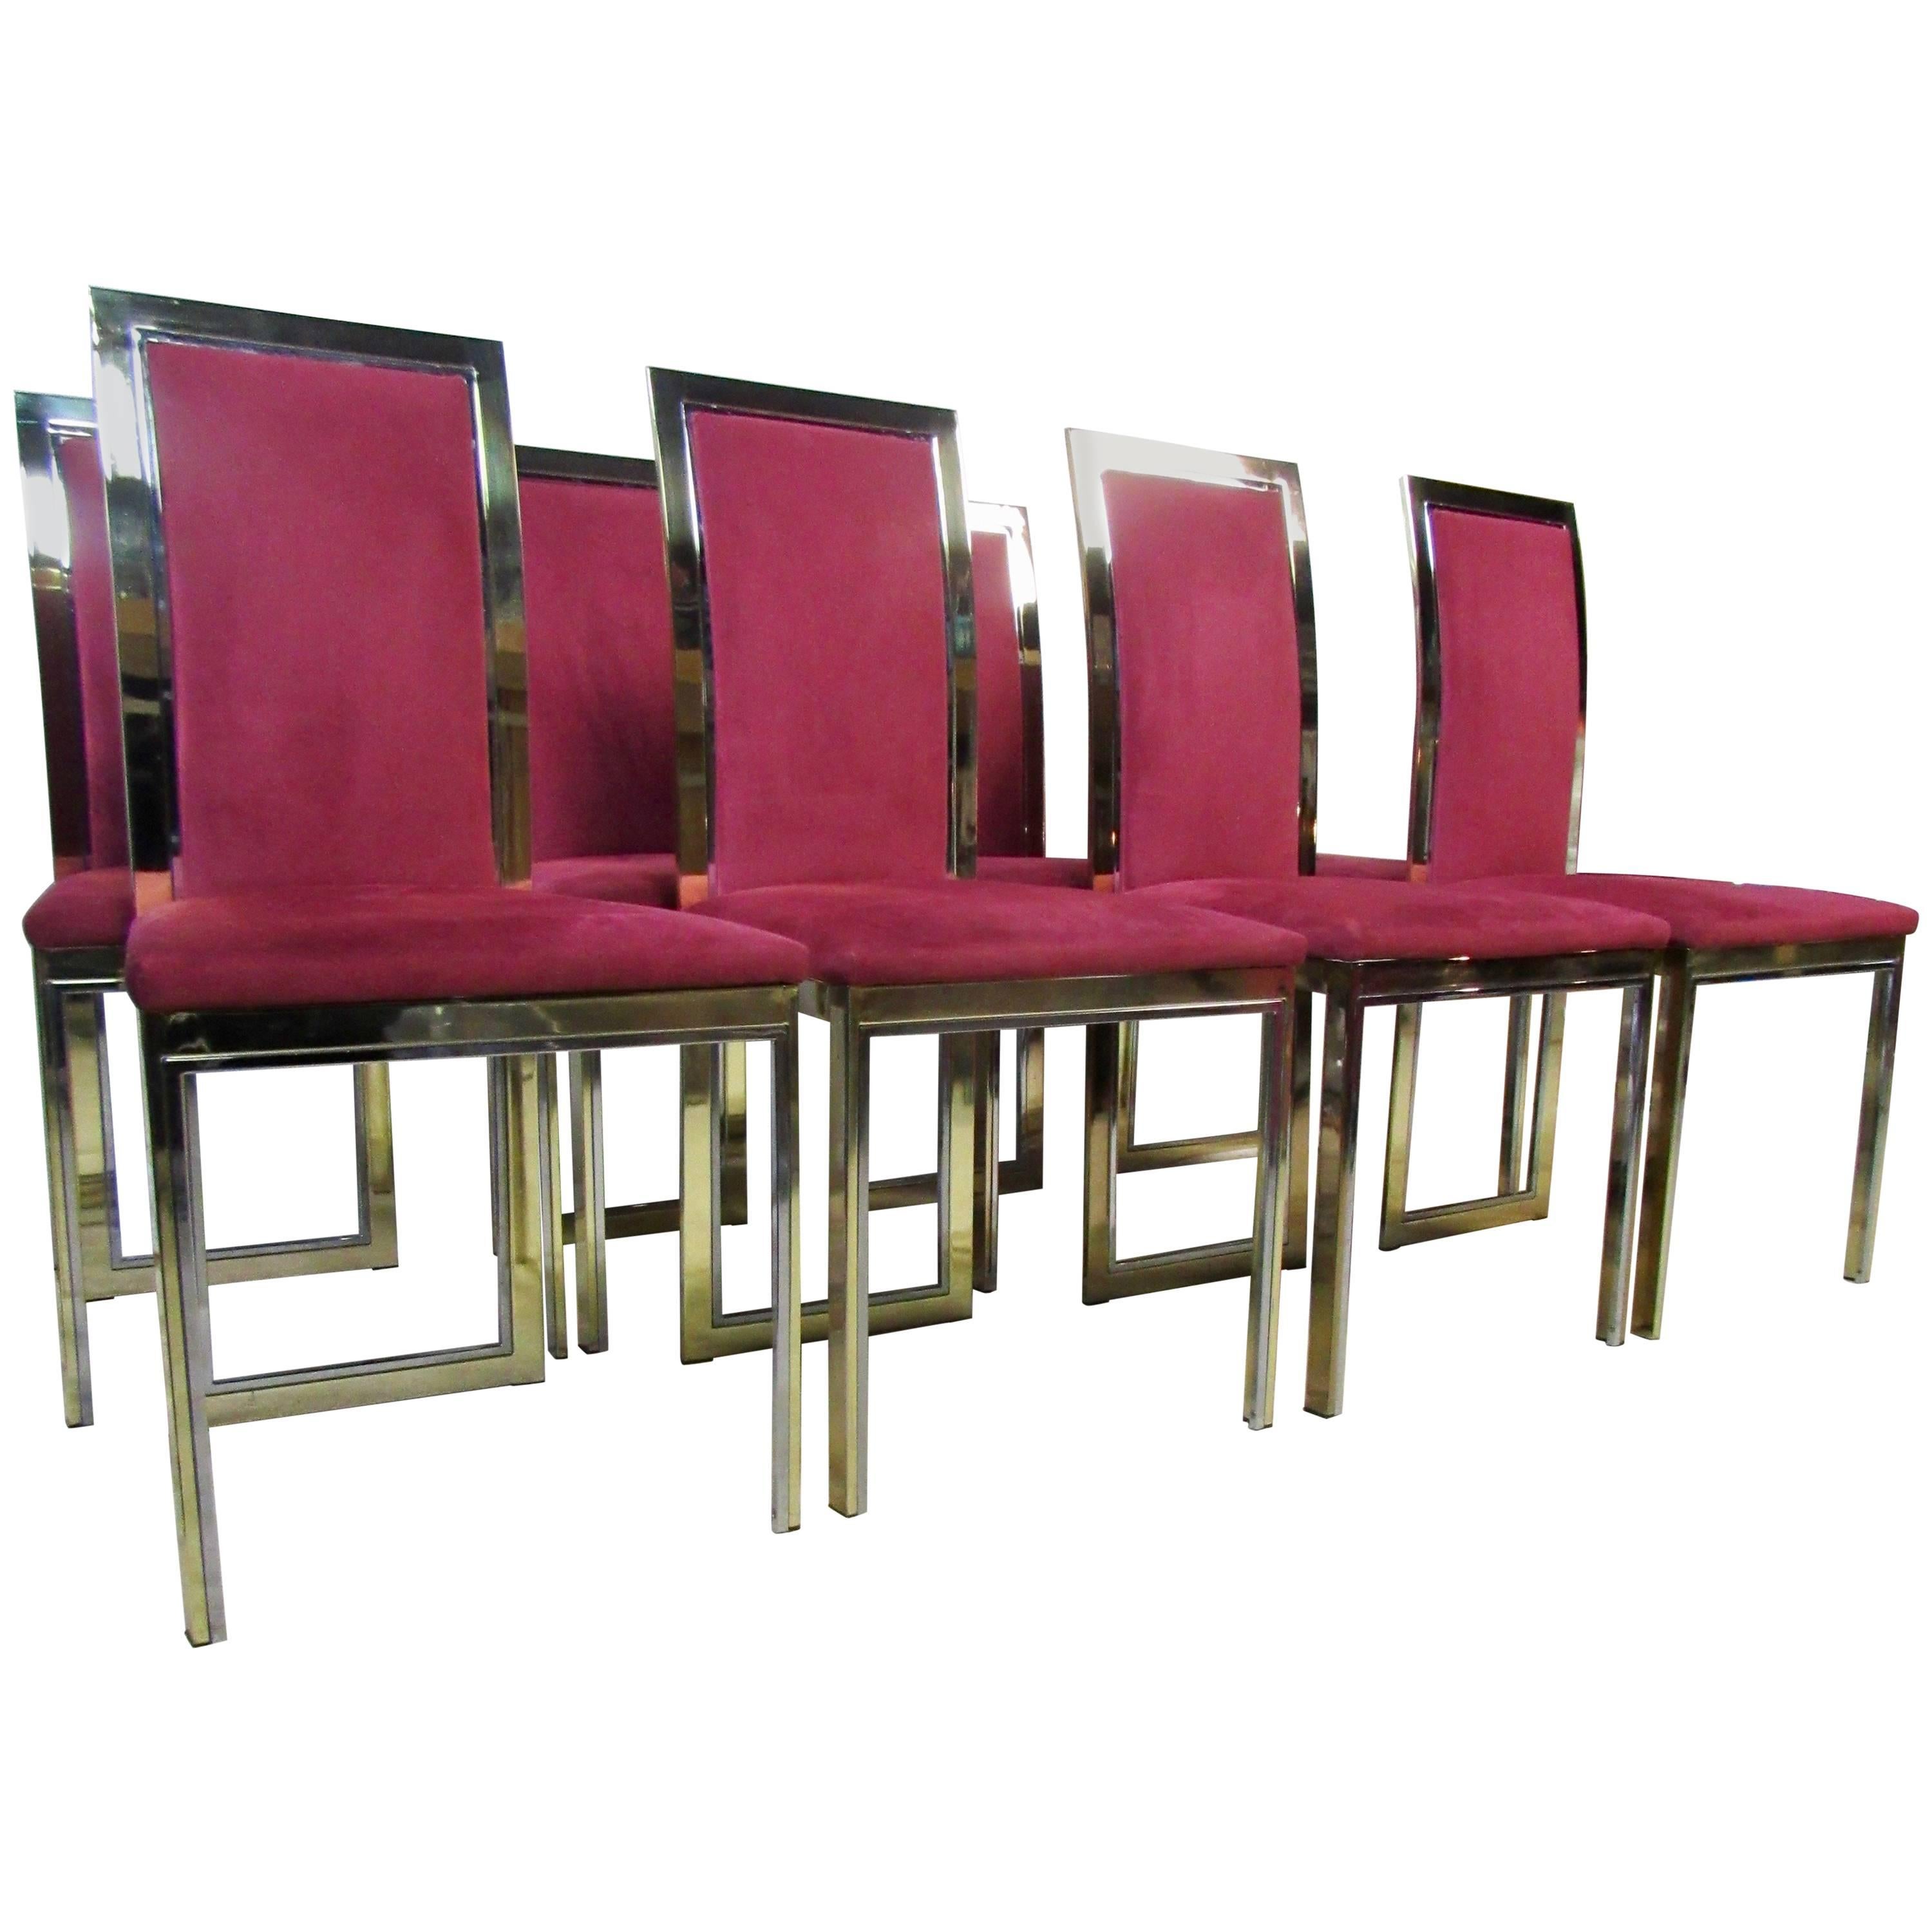 Eight Chrome and Brass Dining Chairs Attributed to Romeo Rega